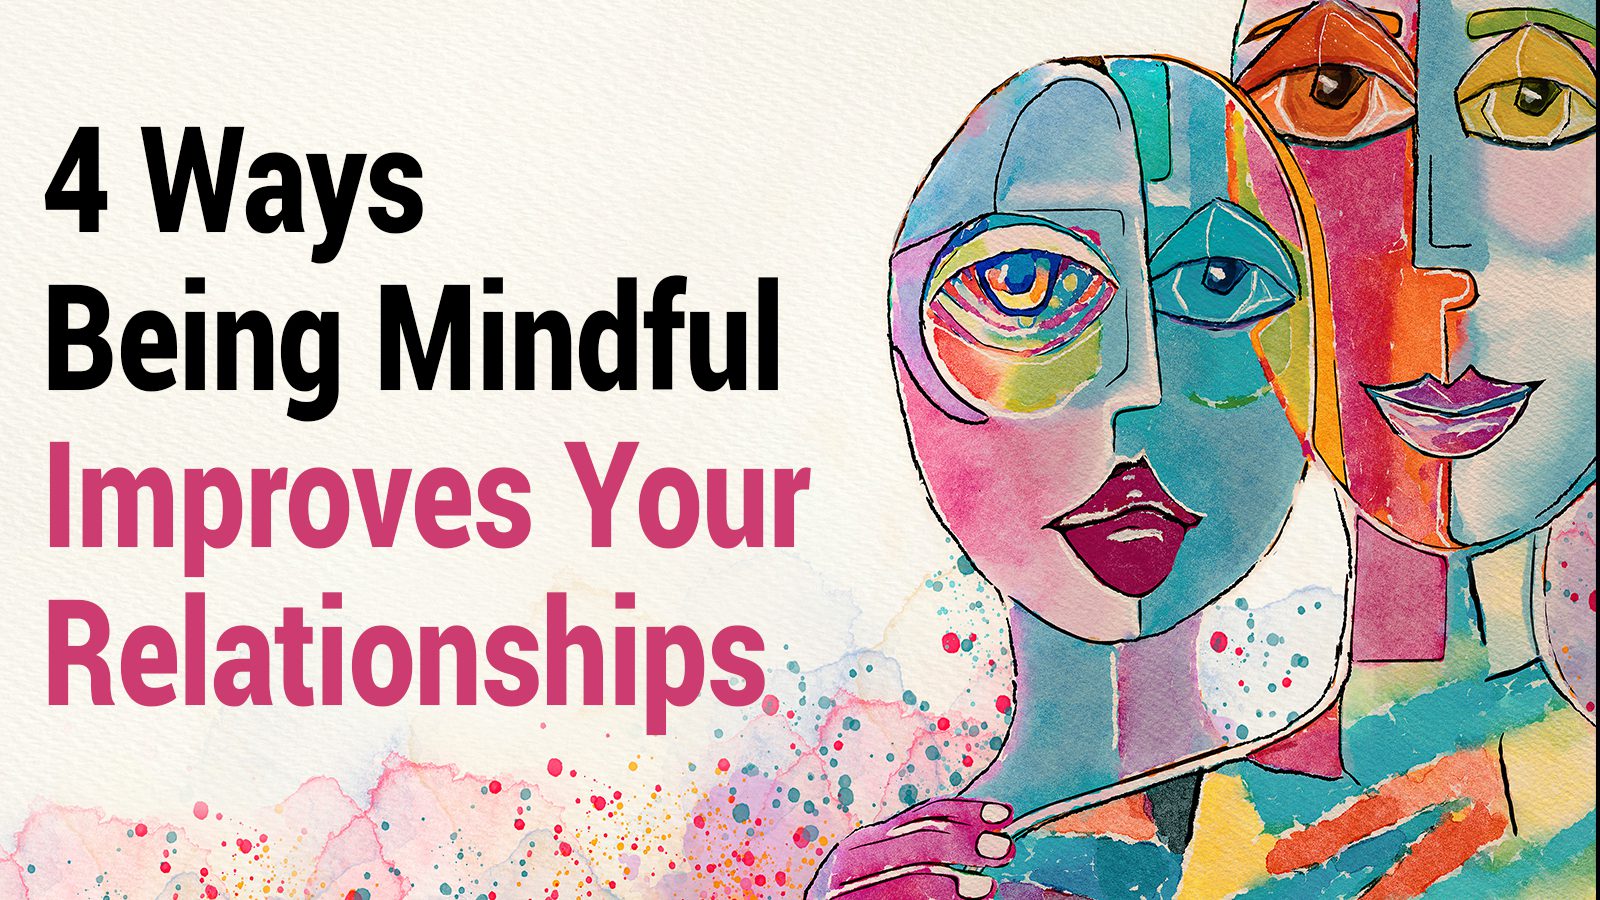 4 Ways Being Mindful Improves Your Relationships